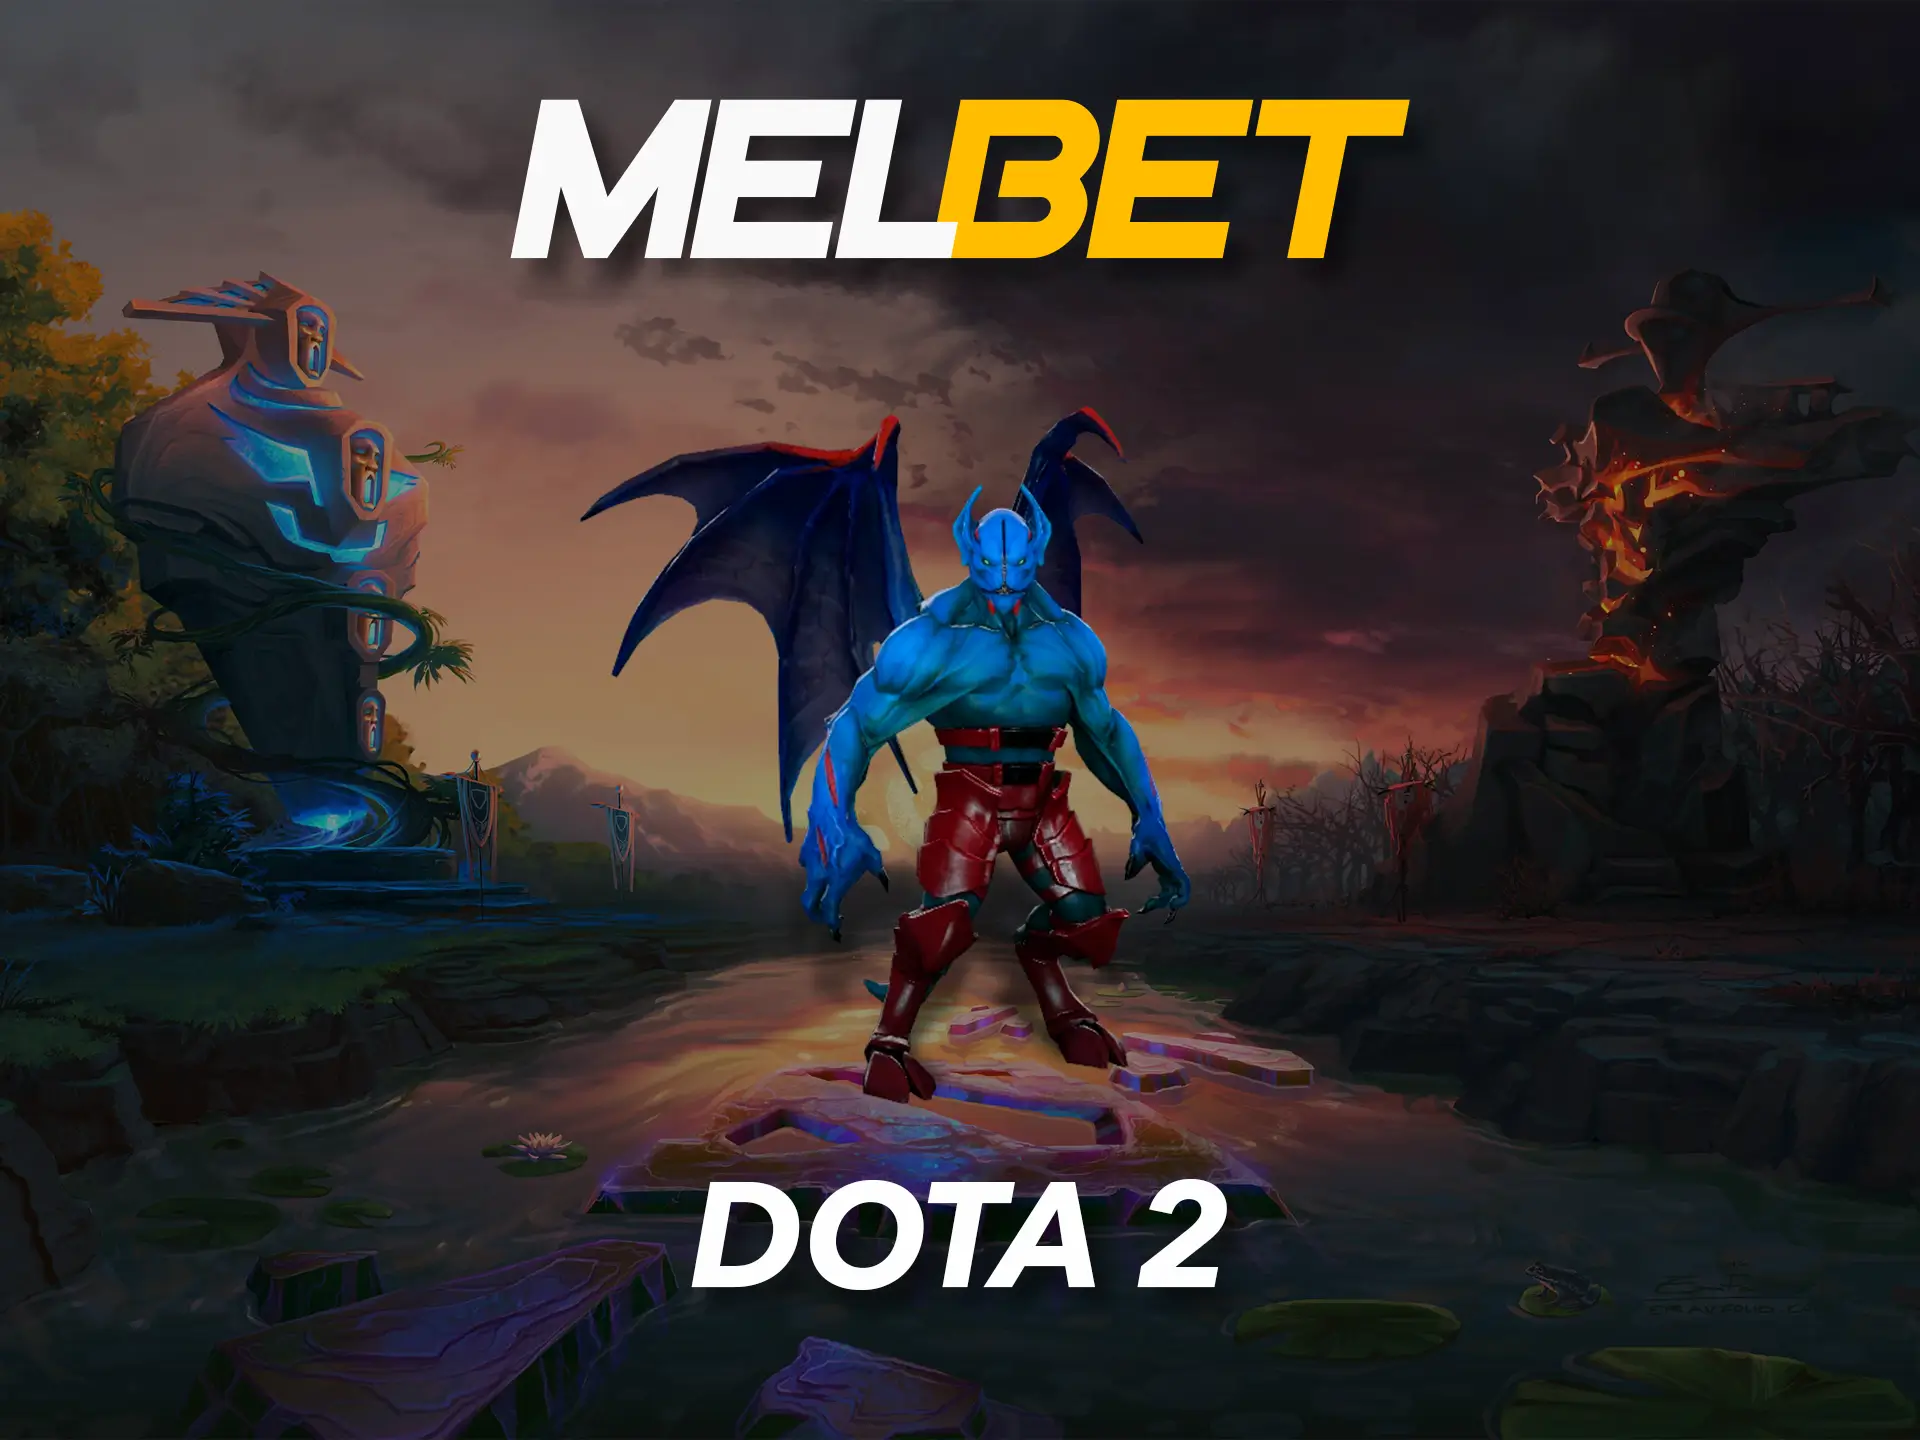 Choose the side of light or darkness in Melbet's Dota 2 game.